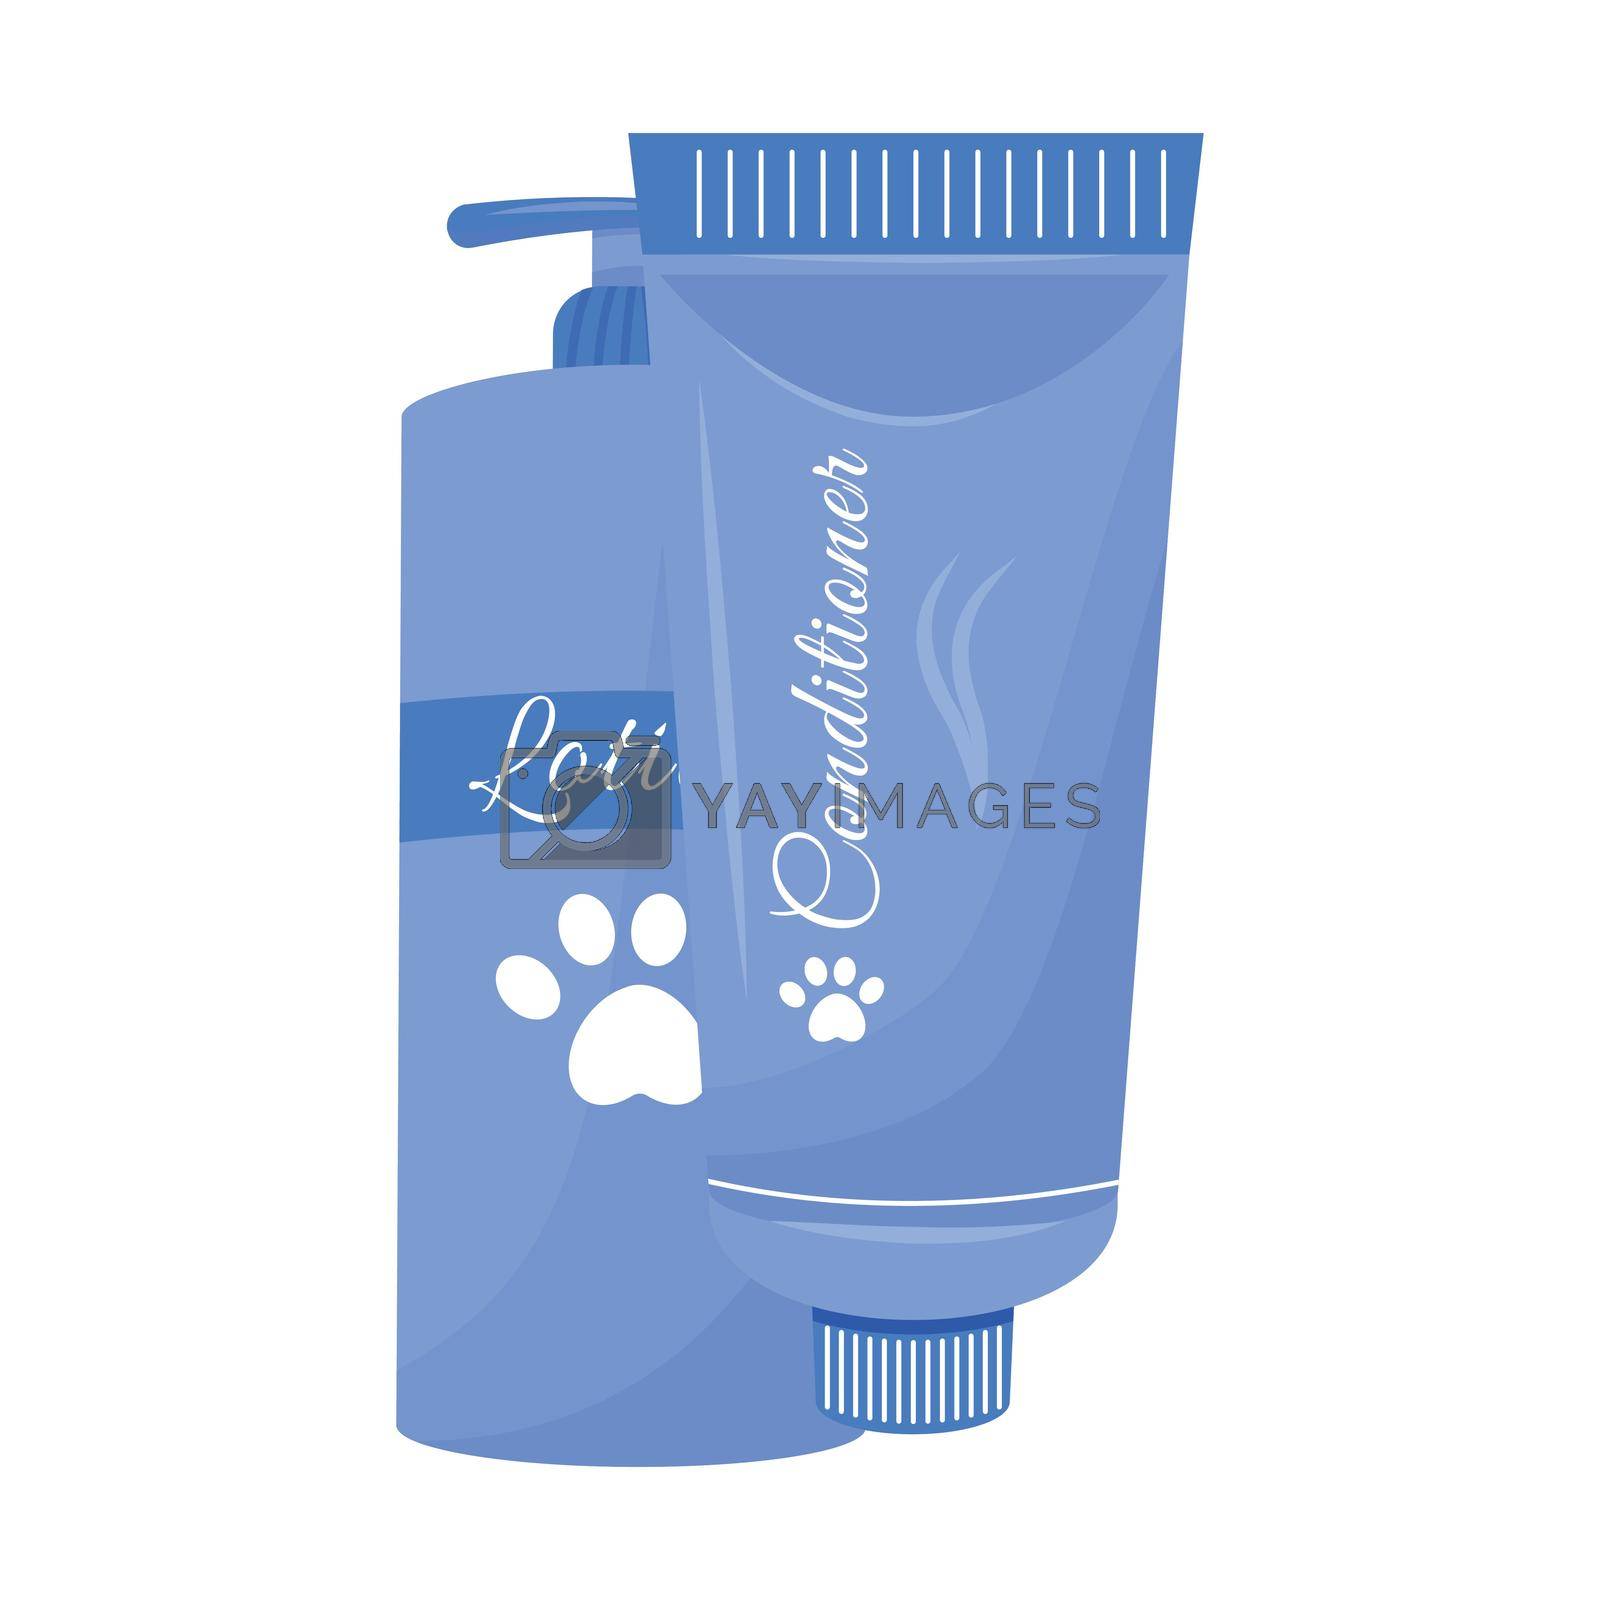 Cosmetics for pets semi flat color vector element. Full sized object on white. Domestic animals care. Grooming for cats and dogs simple cartoon style illustration for web graphic design and animation